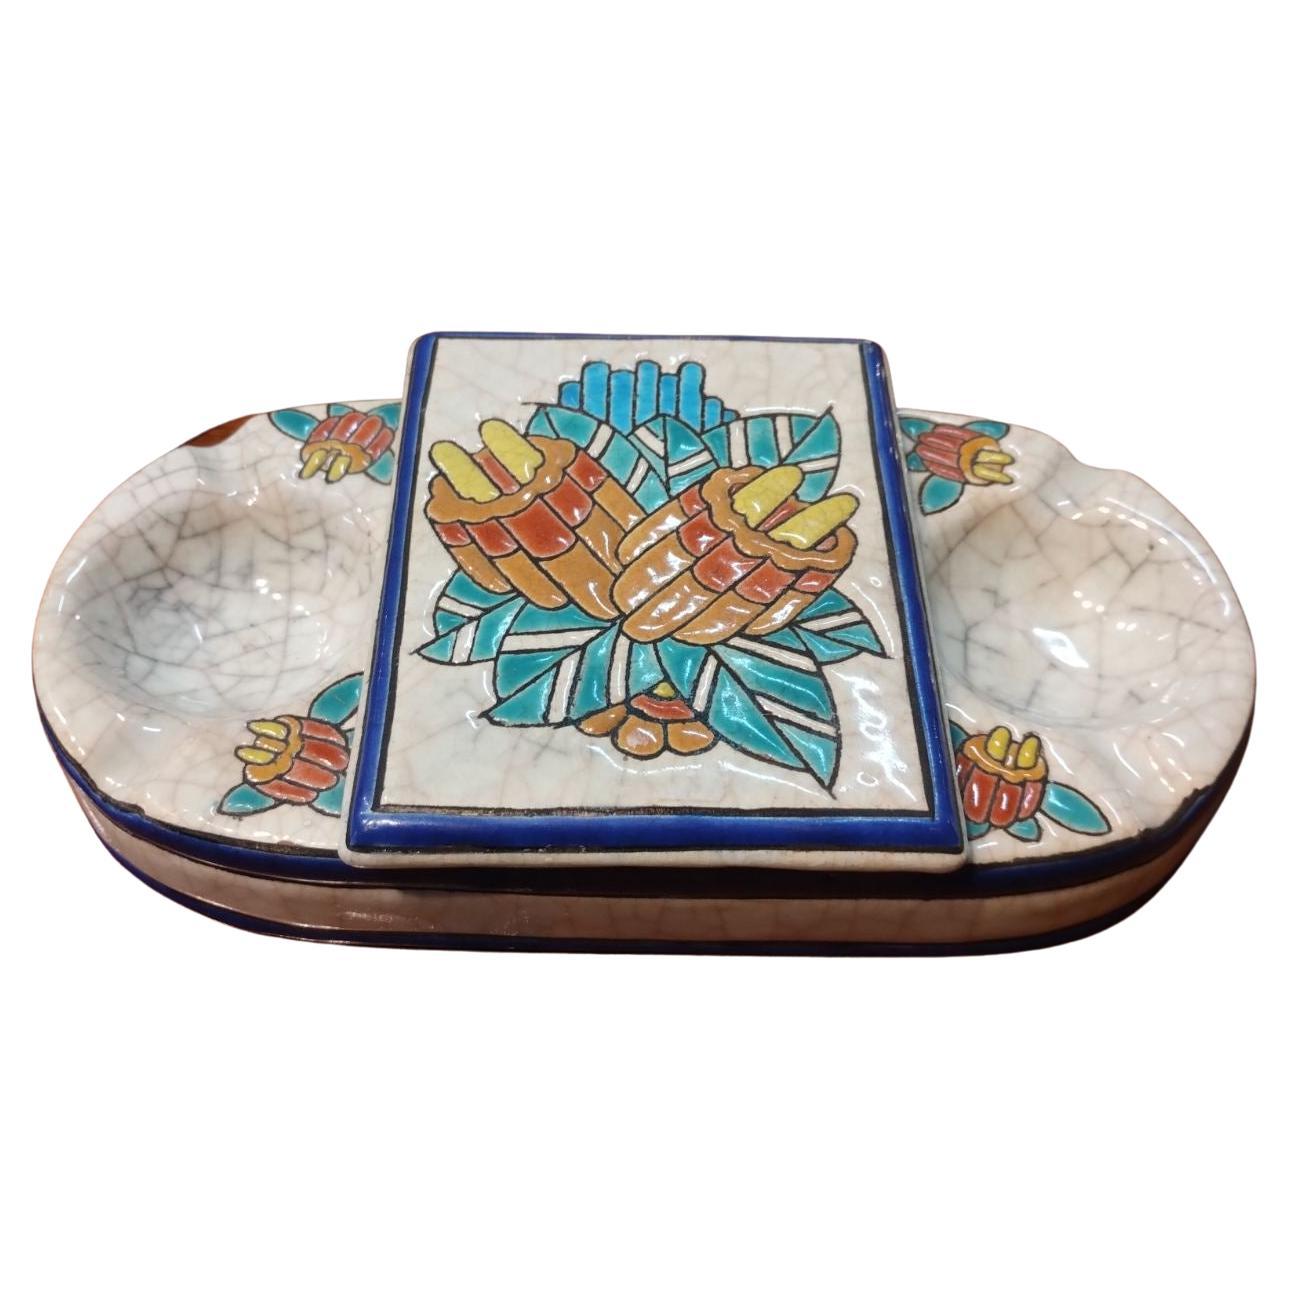 20th Century French Hand Painted Ceramic Ashtray by Longwy Stamped and Numbered